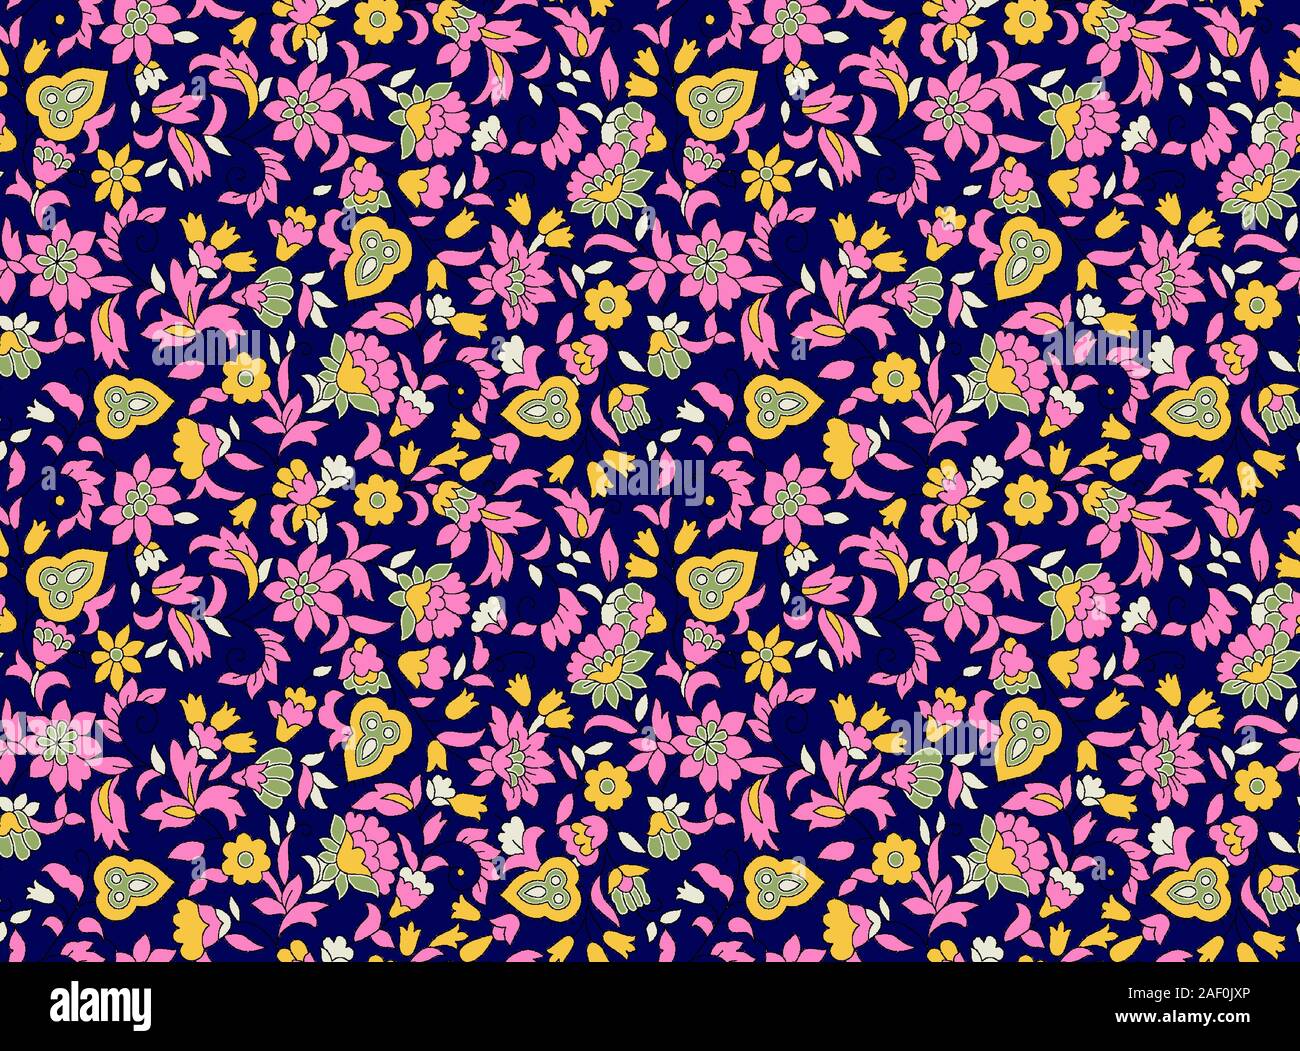 seamless floral design pattern background Stock Photo